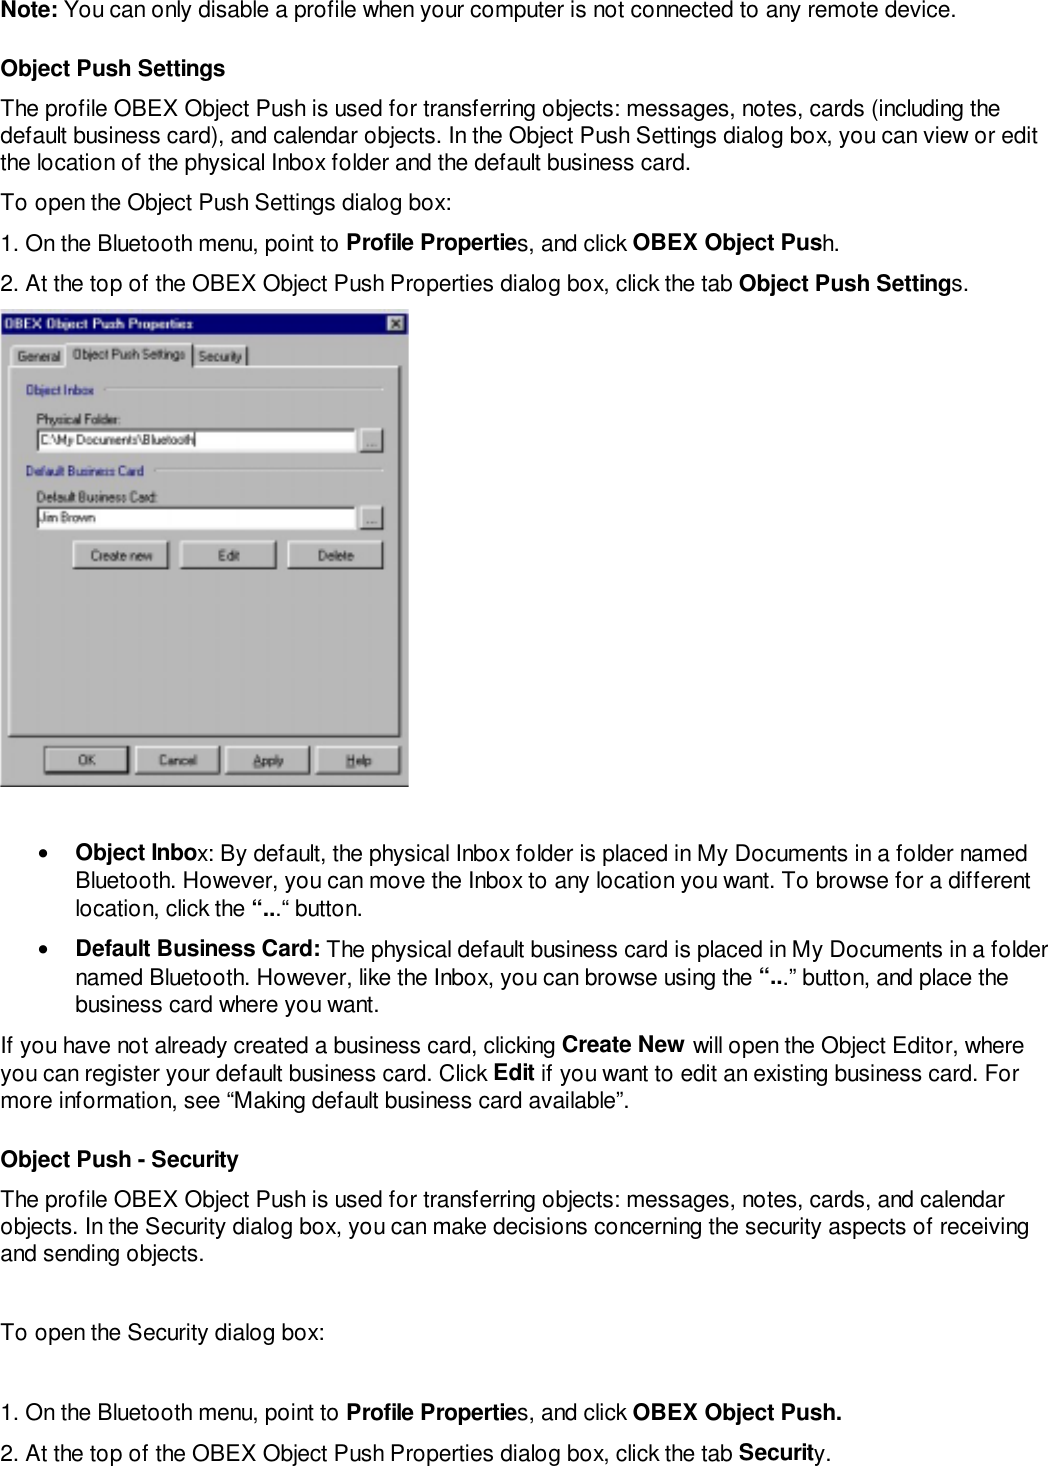 Note: You can only disable a profile when your computer is not connected to any remote device.Object Push SettingsThe profile OBEX Object Push is used for transferring objects: messages, notes, cards (including thedefault business card), and calendar objects. In the Object Push Settings dialog box, you can view or editthe location of the physical Inbox folder and the default business card.To open the Object Push Settings dialog box:1. On the Bluetooth menu, point to Profile Properties, and click OBEX Object Push.2. At the top of the OBEX Object Push Properties dialog box, click the tab Object Push Settings.• Object Inbox: By default, the physical Inbox folder is placed in My Documents in a folder namedBluetooth. However, you can move the Inbox to any location you want. To browse for a differentlocation, click the “...“ button.• Default Business Card: The physical default business card is placed in My Documents in a foldernamed Bluetooth. However, like the Inbox, you can browse using the “...” button, and place thebusiness card where you want.If you have not already created a business card, clicking Create New will open the Object Editor, whereyou can register your default business card. Click Edit if you want to edit an existing business card. Formore information, see “Making default business card available”.Object Push - SecurityThe profile OBEX Object Push is used for transferring objects: messages, notes, cards, and calendarobjects. In the Security dialog box, you can make decisions concerning the security aspects of receivingand sending objects.To open the Security dialog box:1. On the Bluetooth menu, point to Profile Properties, and click OBEX Object Push.2. At the top of the OBEX Object Push Properties dialog box, click the tab Security.